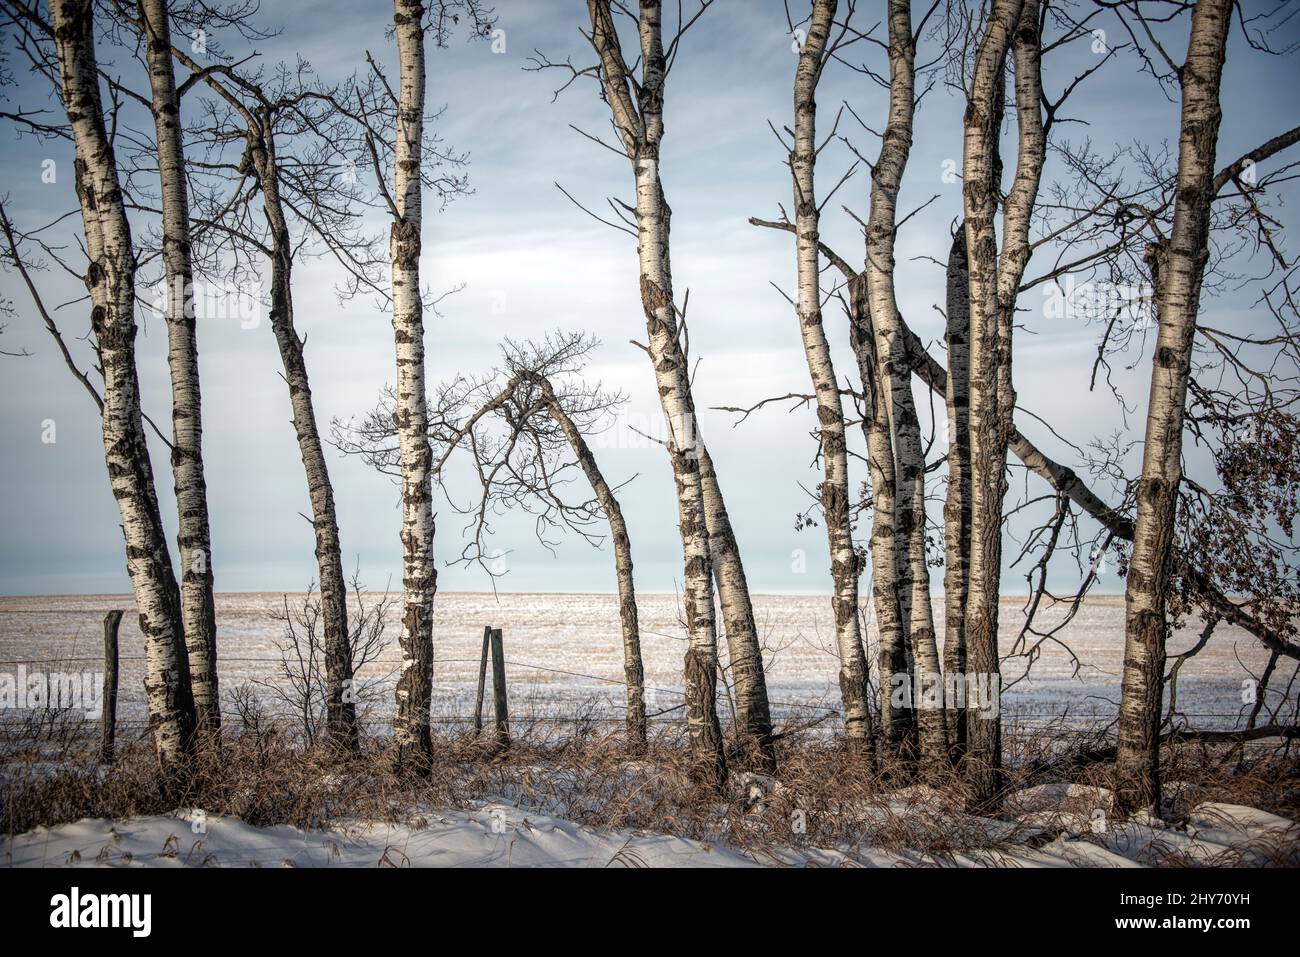 Bare poplar trees in winter along a rural fence line on a farm in Alberta, Canada. Stock Photo